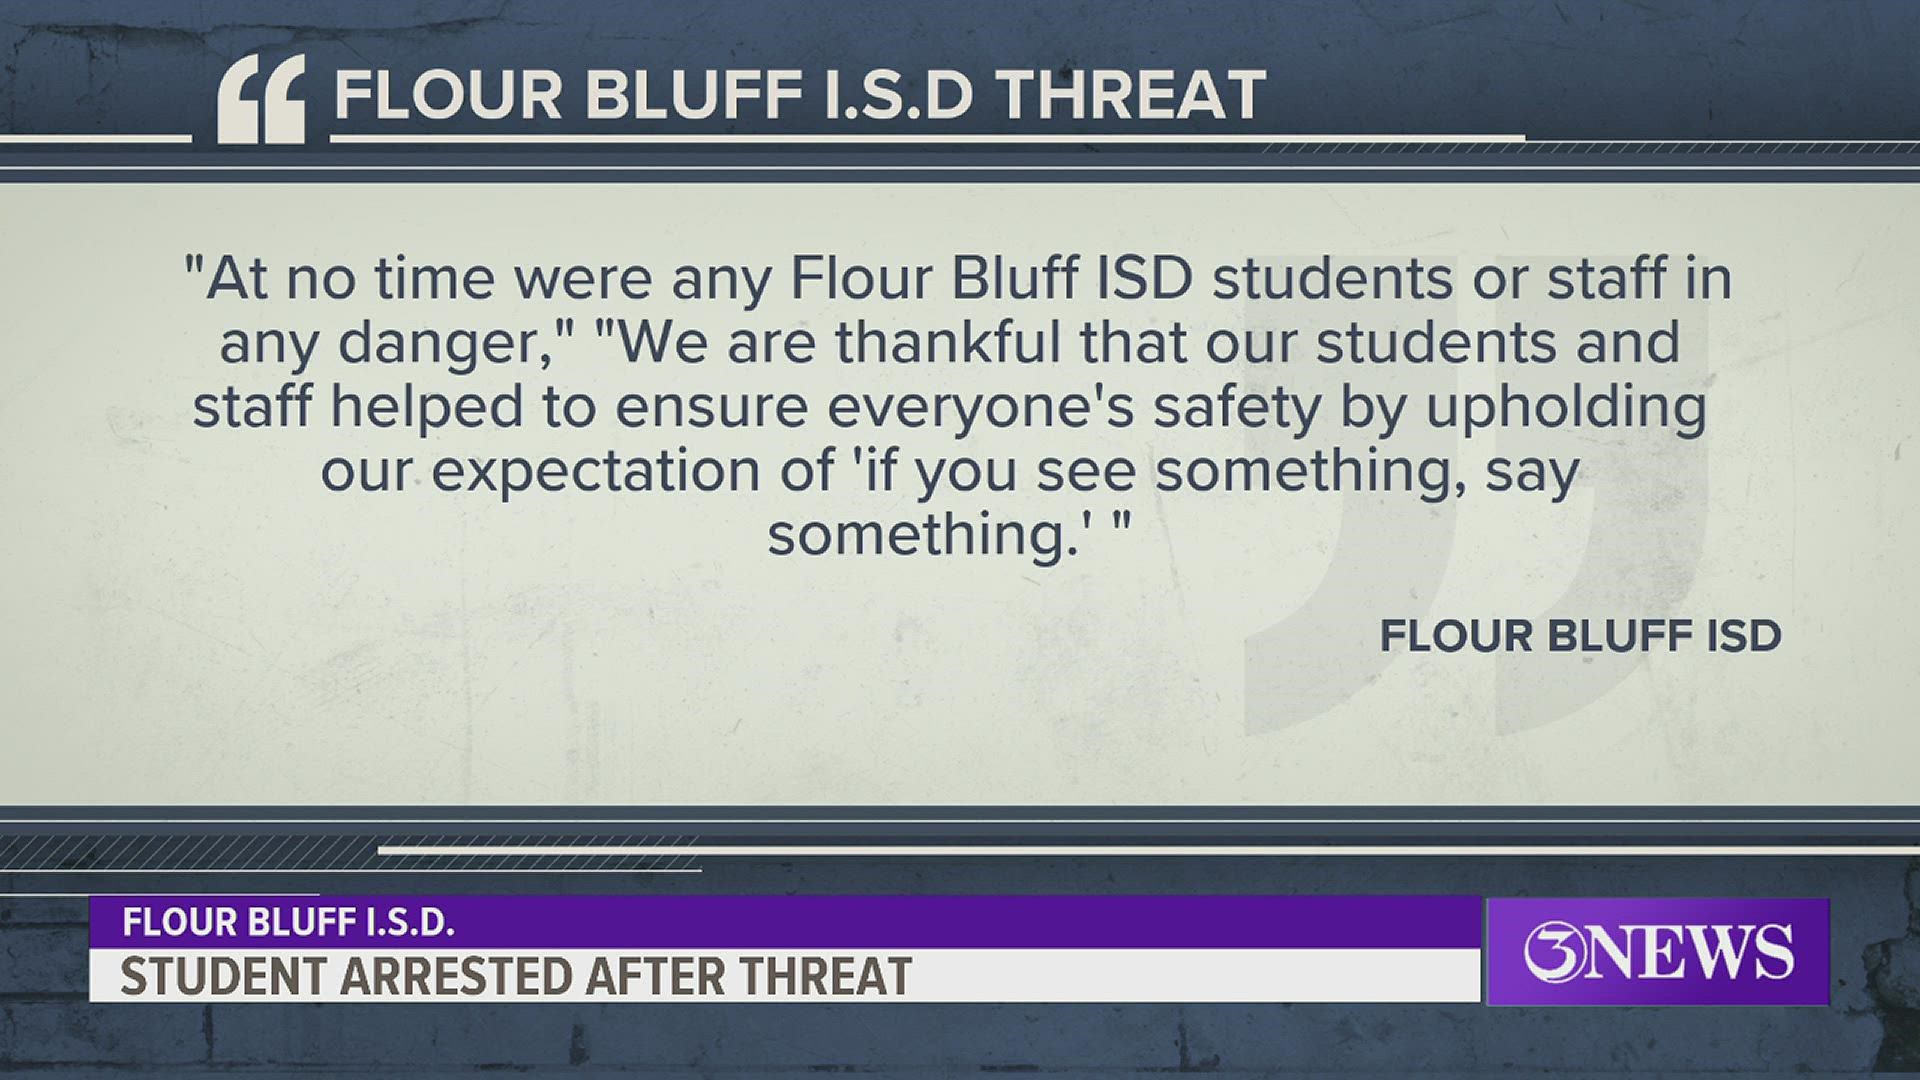 The district sent a letter to parents saying no students or staff were ever in danger.